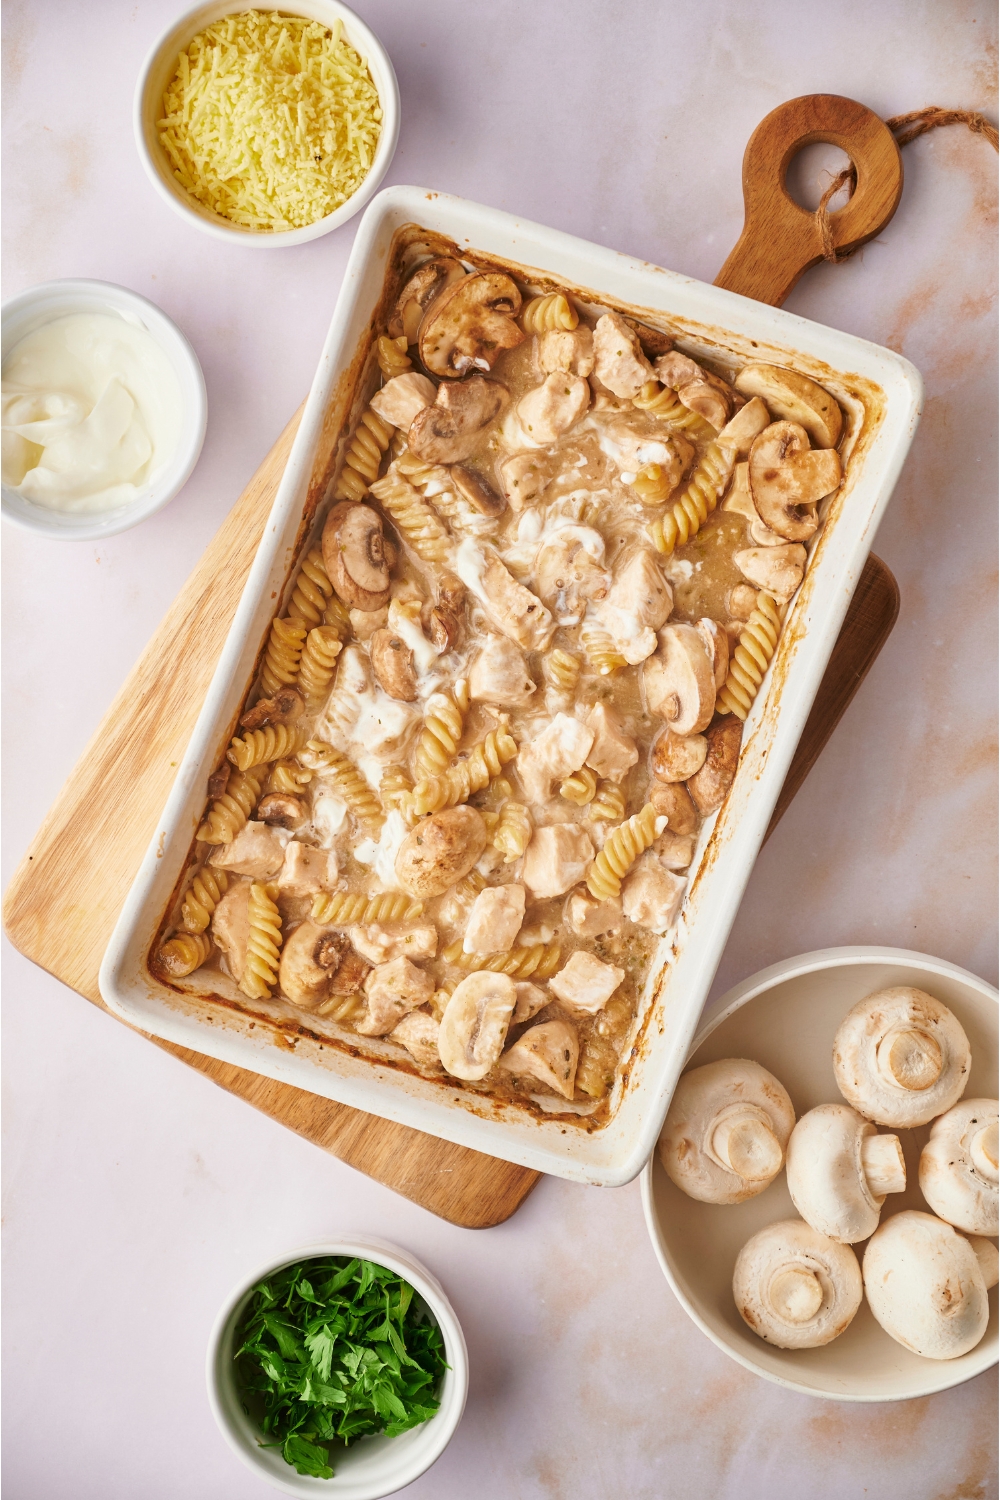 White baking dish on top of a wooden board filled with freshly baked chicken and mushroom casserole that has sour cream mixed on top. The dish is surrounded by ingredients including bowls of mushrooms, sour cream, and herbs.